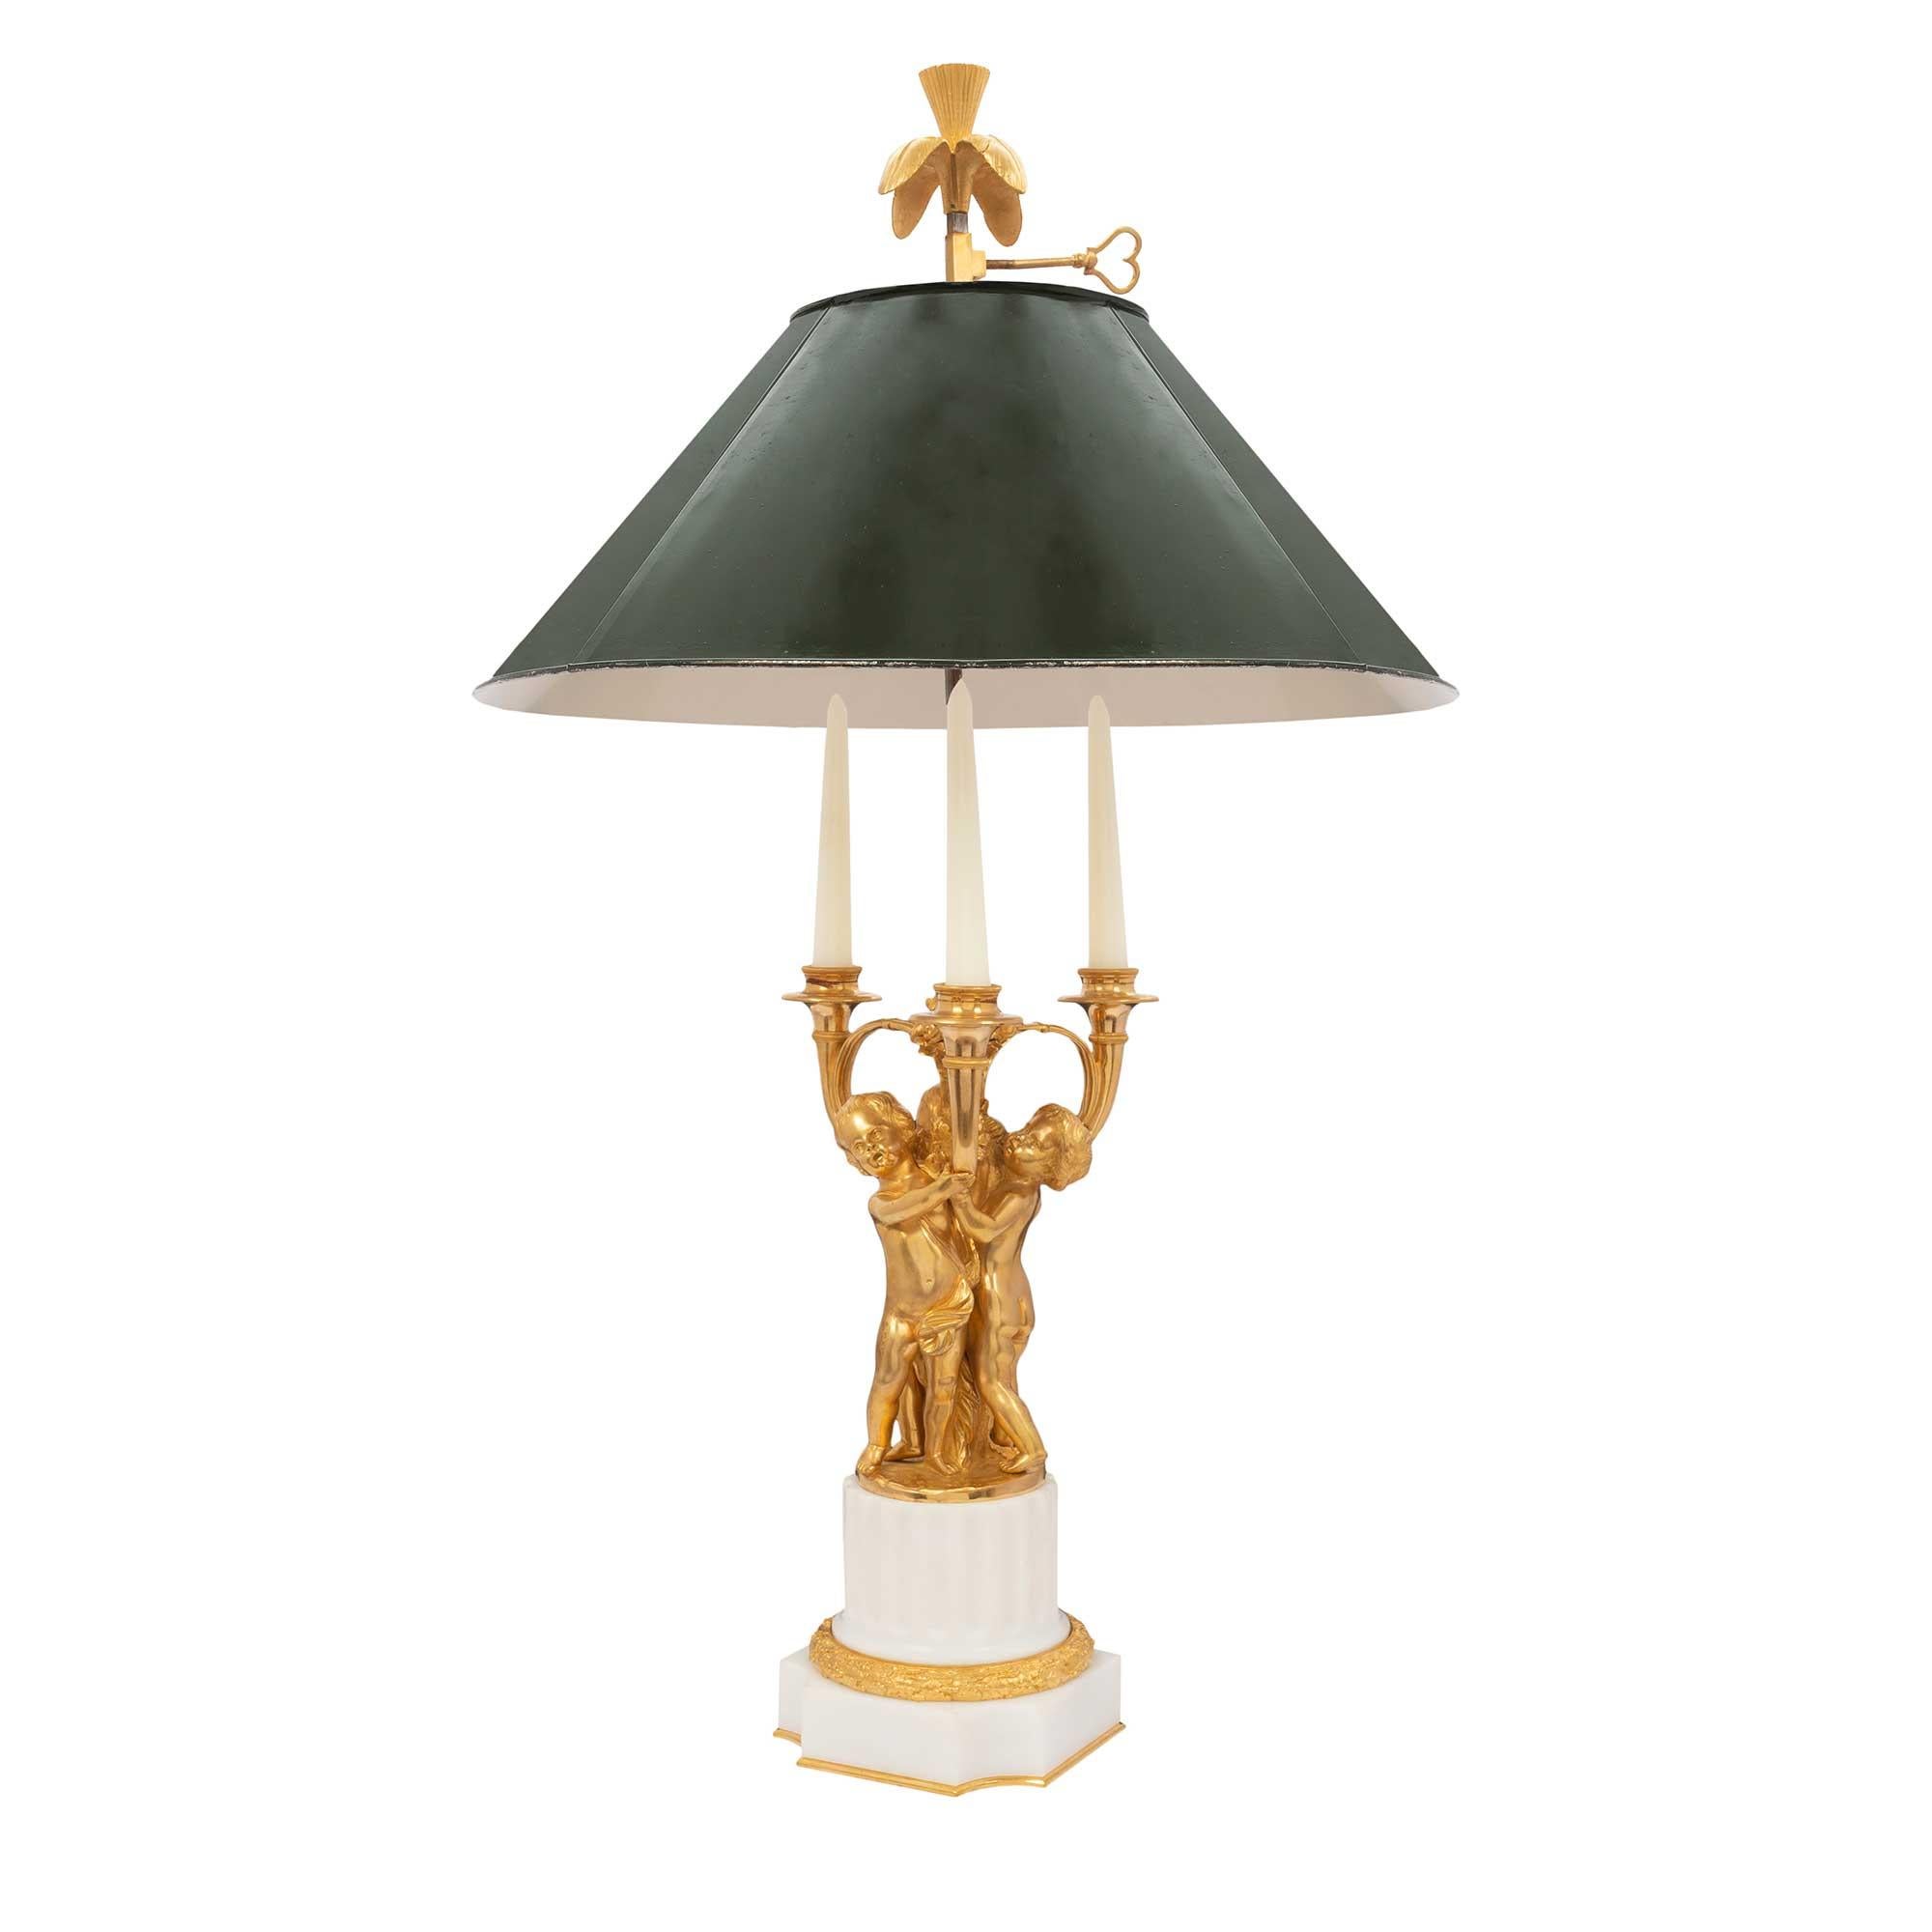 A lovely French mid 19th century Louis XVI st. ormolu and white Carrara marble candelabra mounted into a Bouillotte lamp. The square marble base with concave sides is richly chased with an ormolu berried wreath and raised by a circular fluted marble